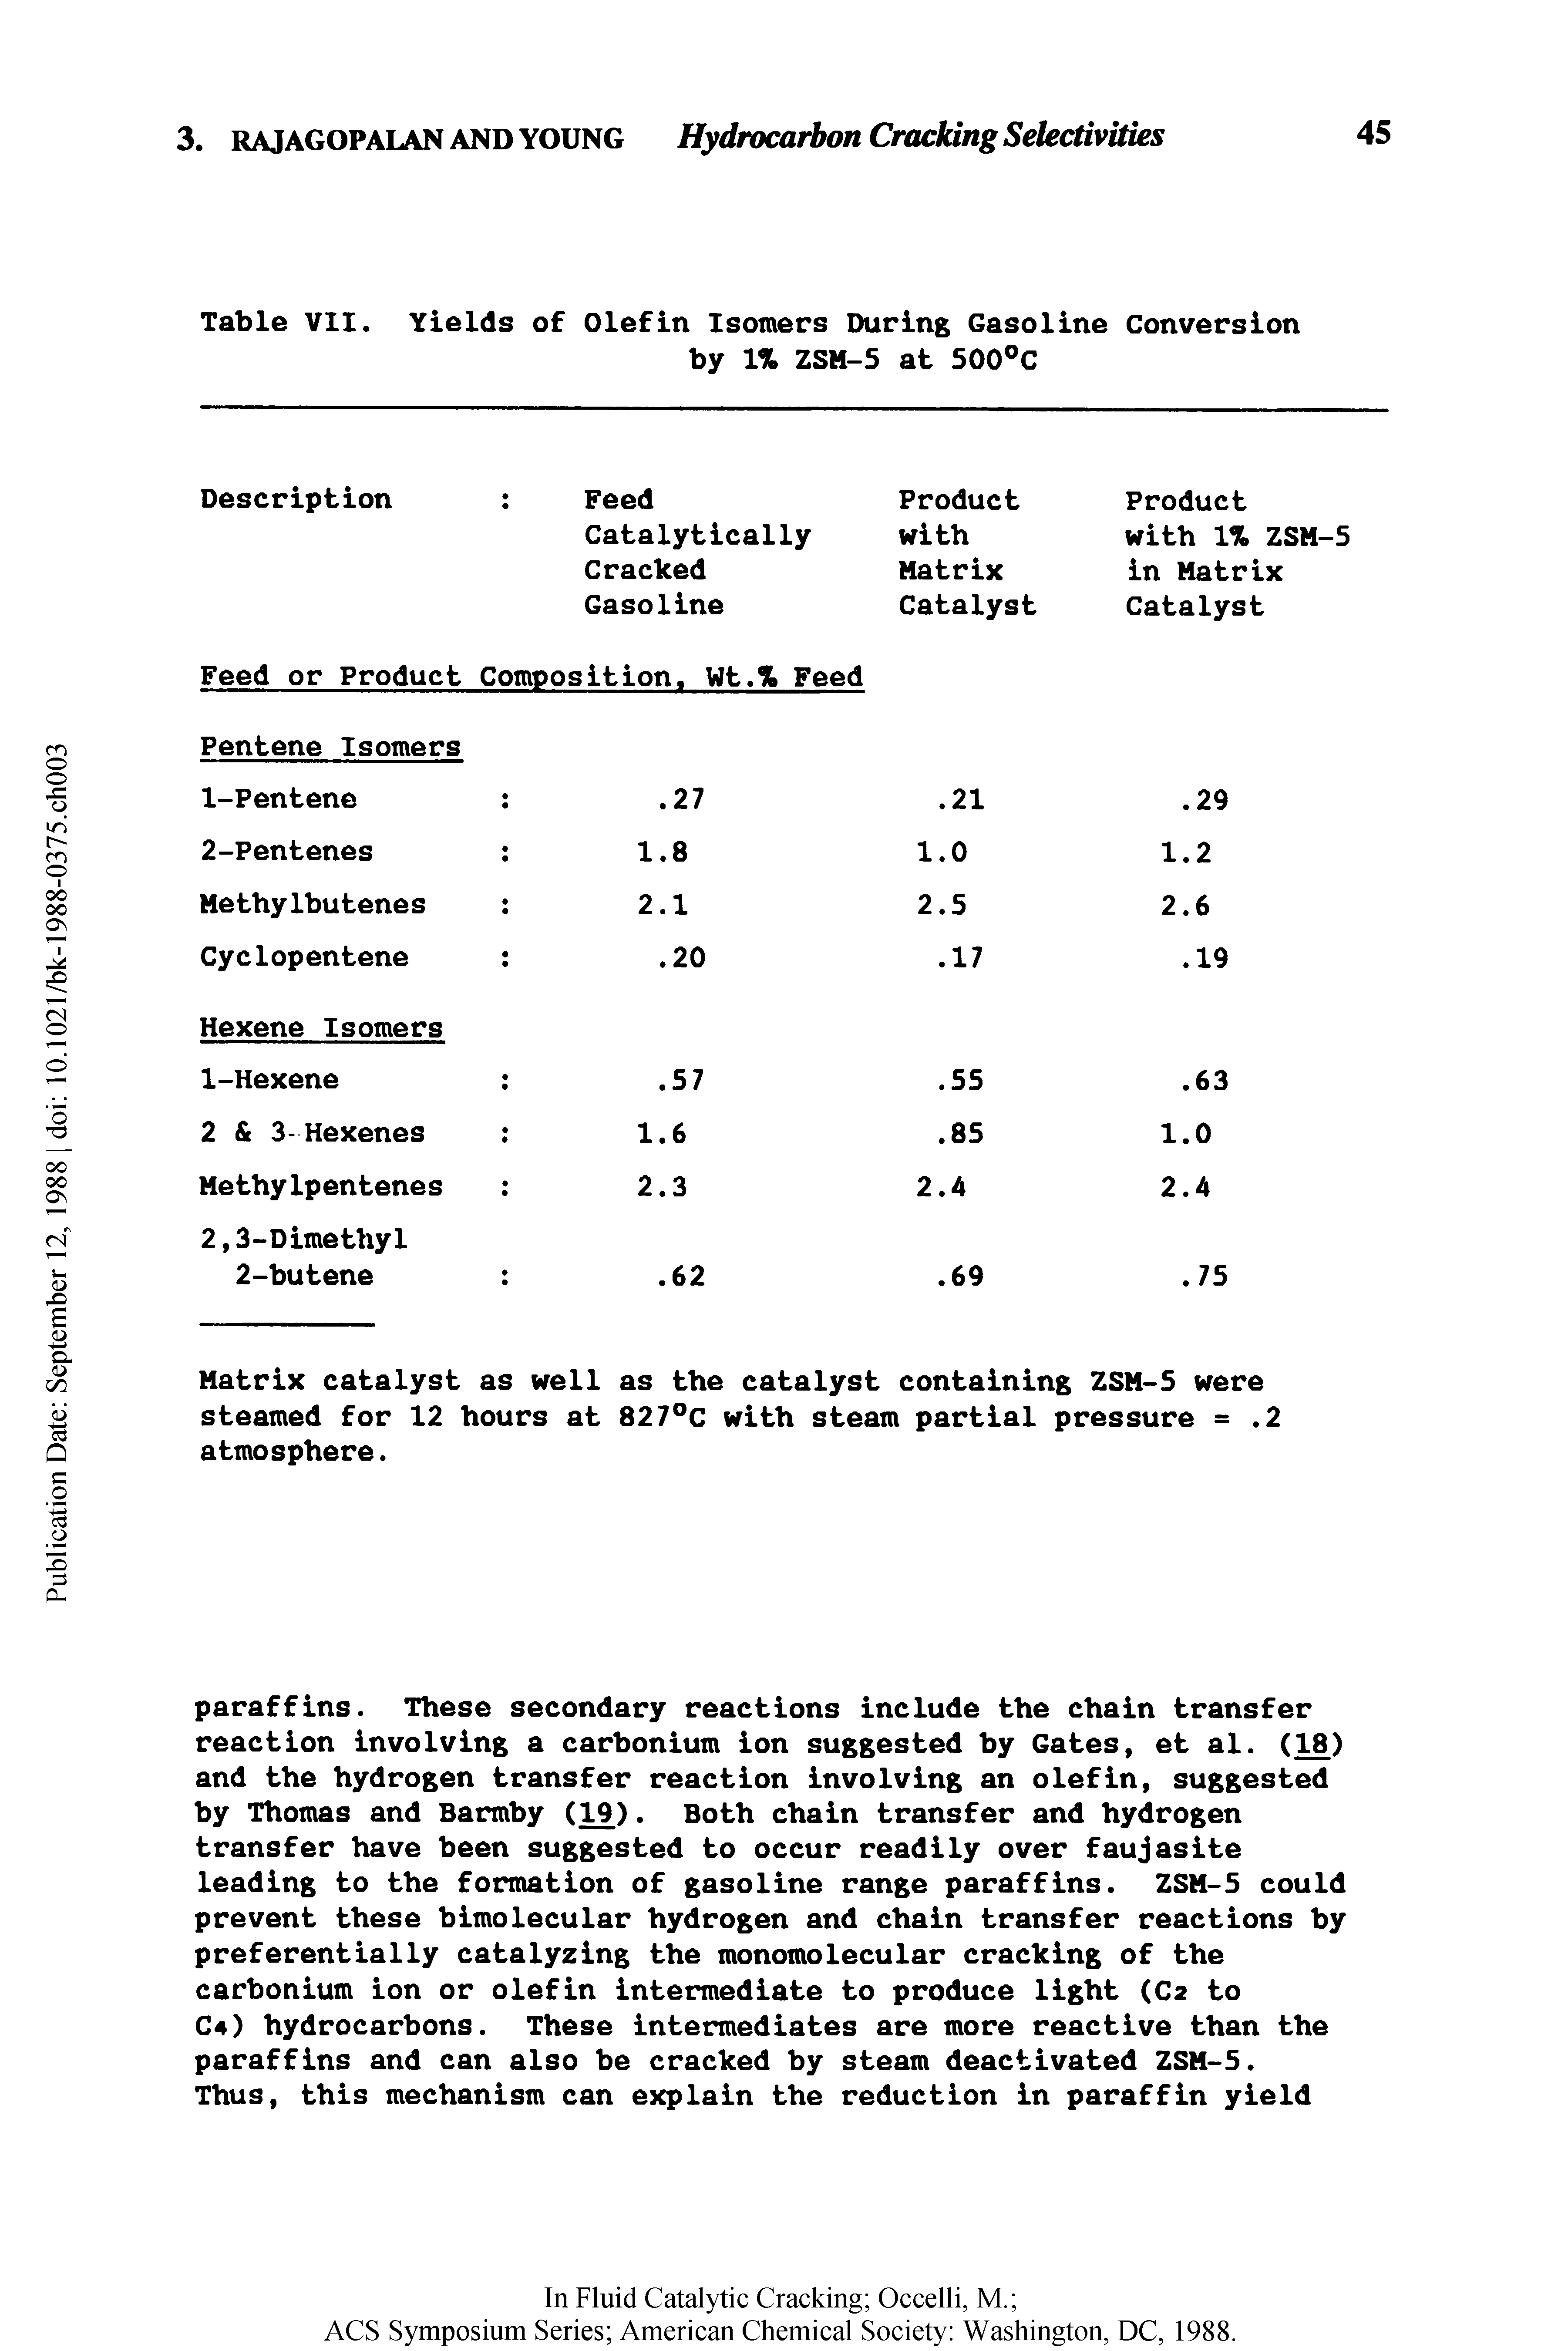 Table VII. Yields of Olefin Isomers During Gasoline Conversion...